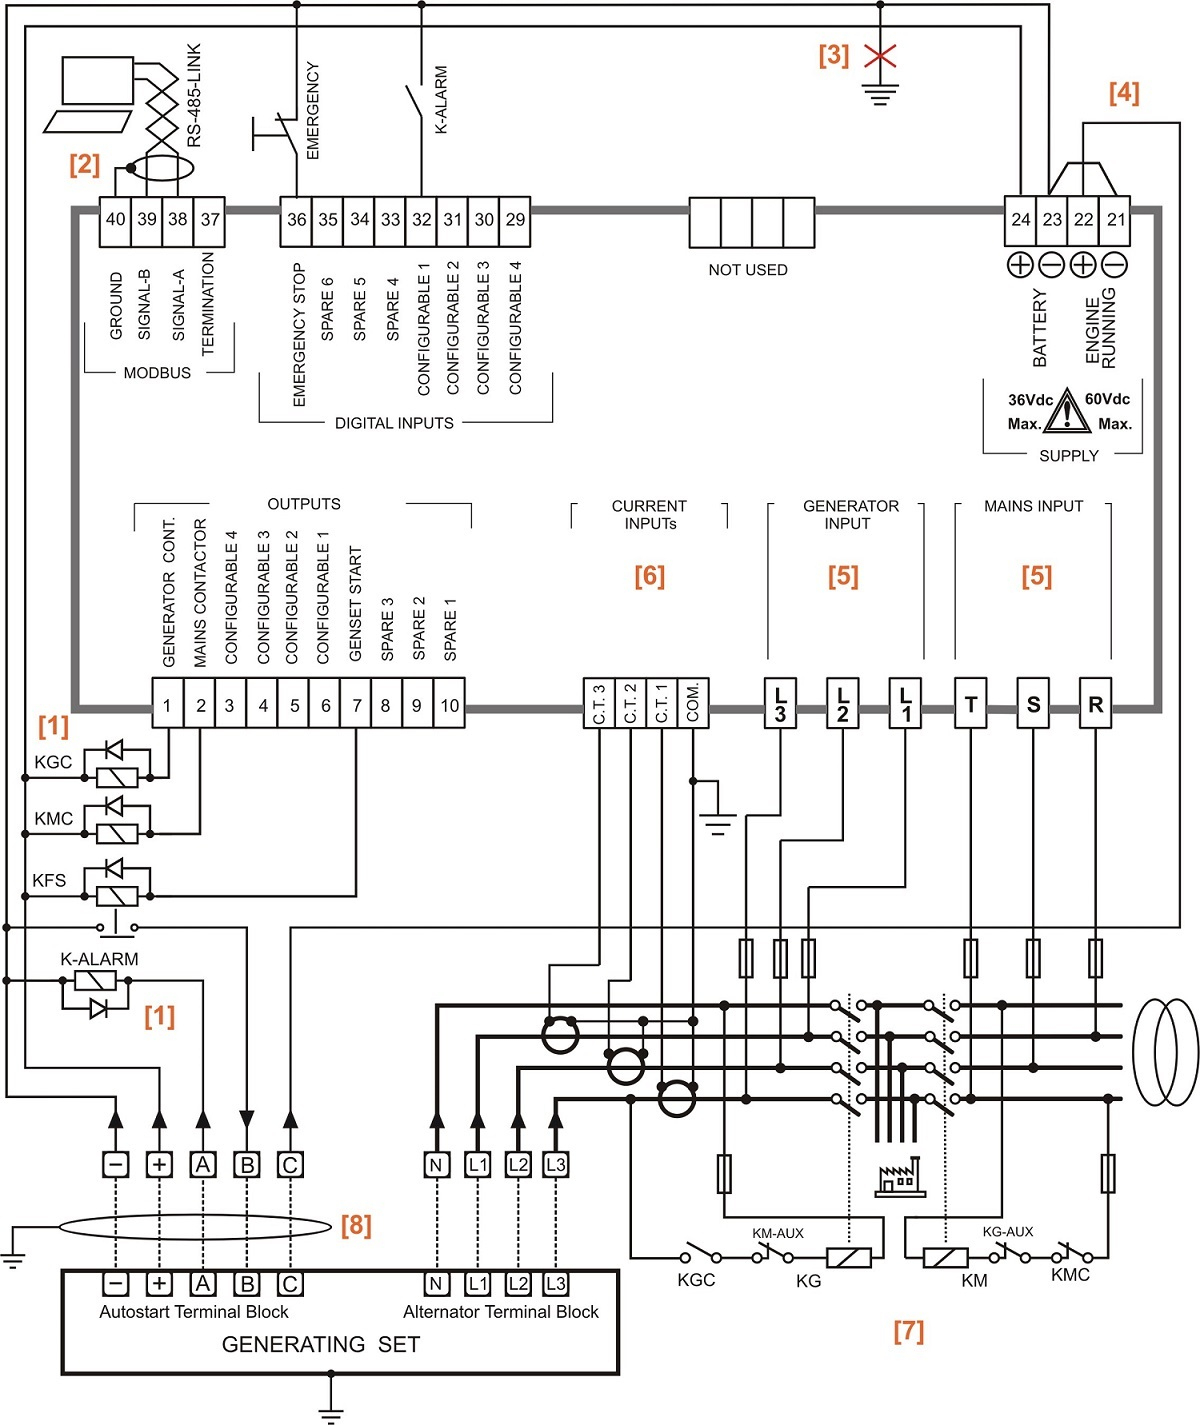 Automatic Transfer Switch Schematic Diagram - Wiring Diagrams Lose - Generator Automatic Transfer Switch Wiring Diagram